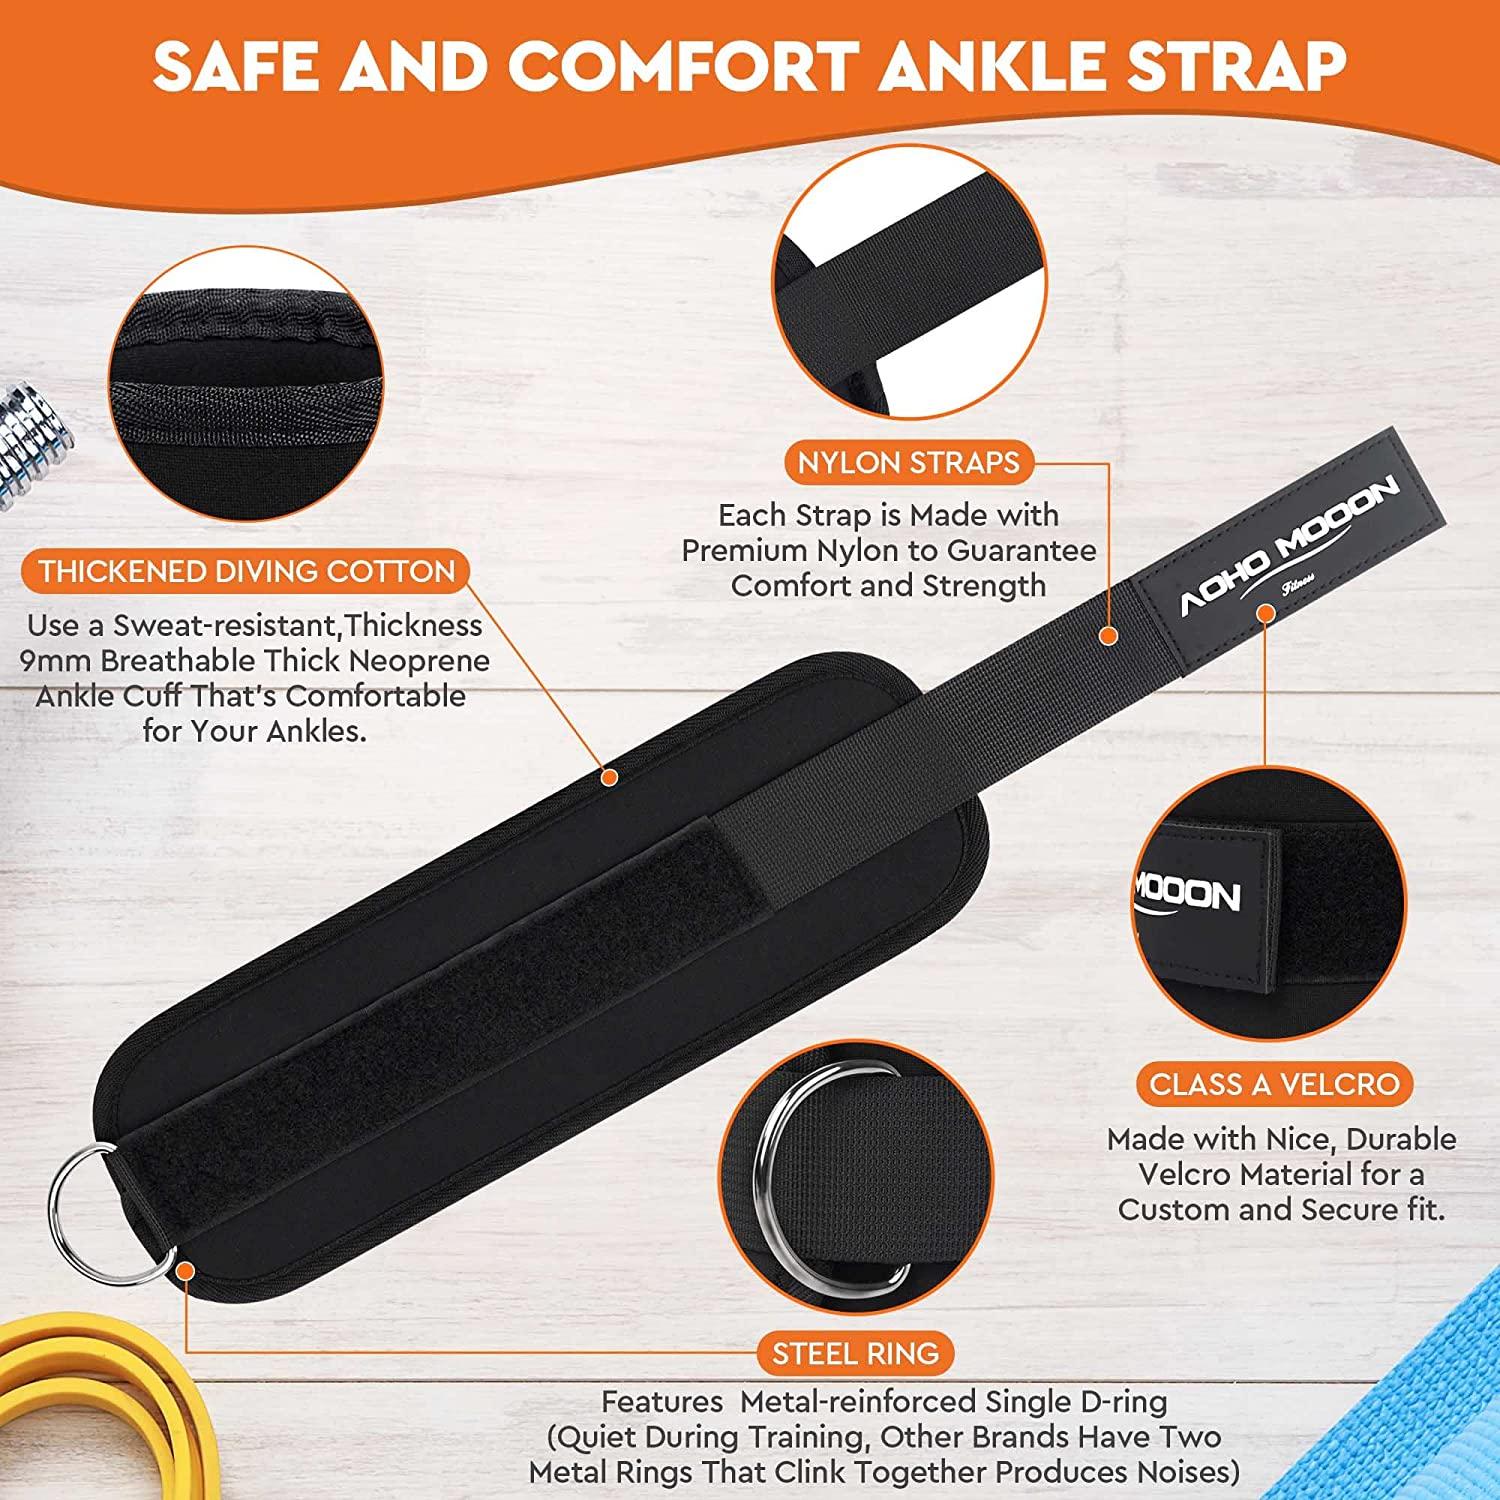 Ankle Strap Attachment - Neoprene Padded